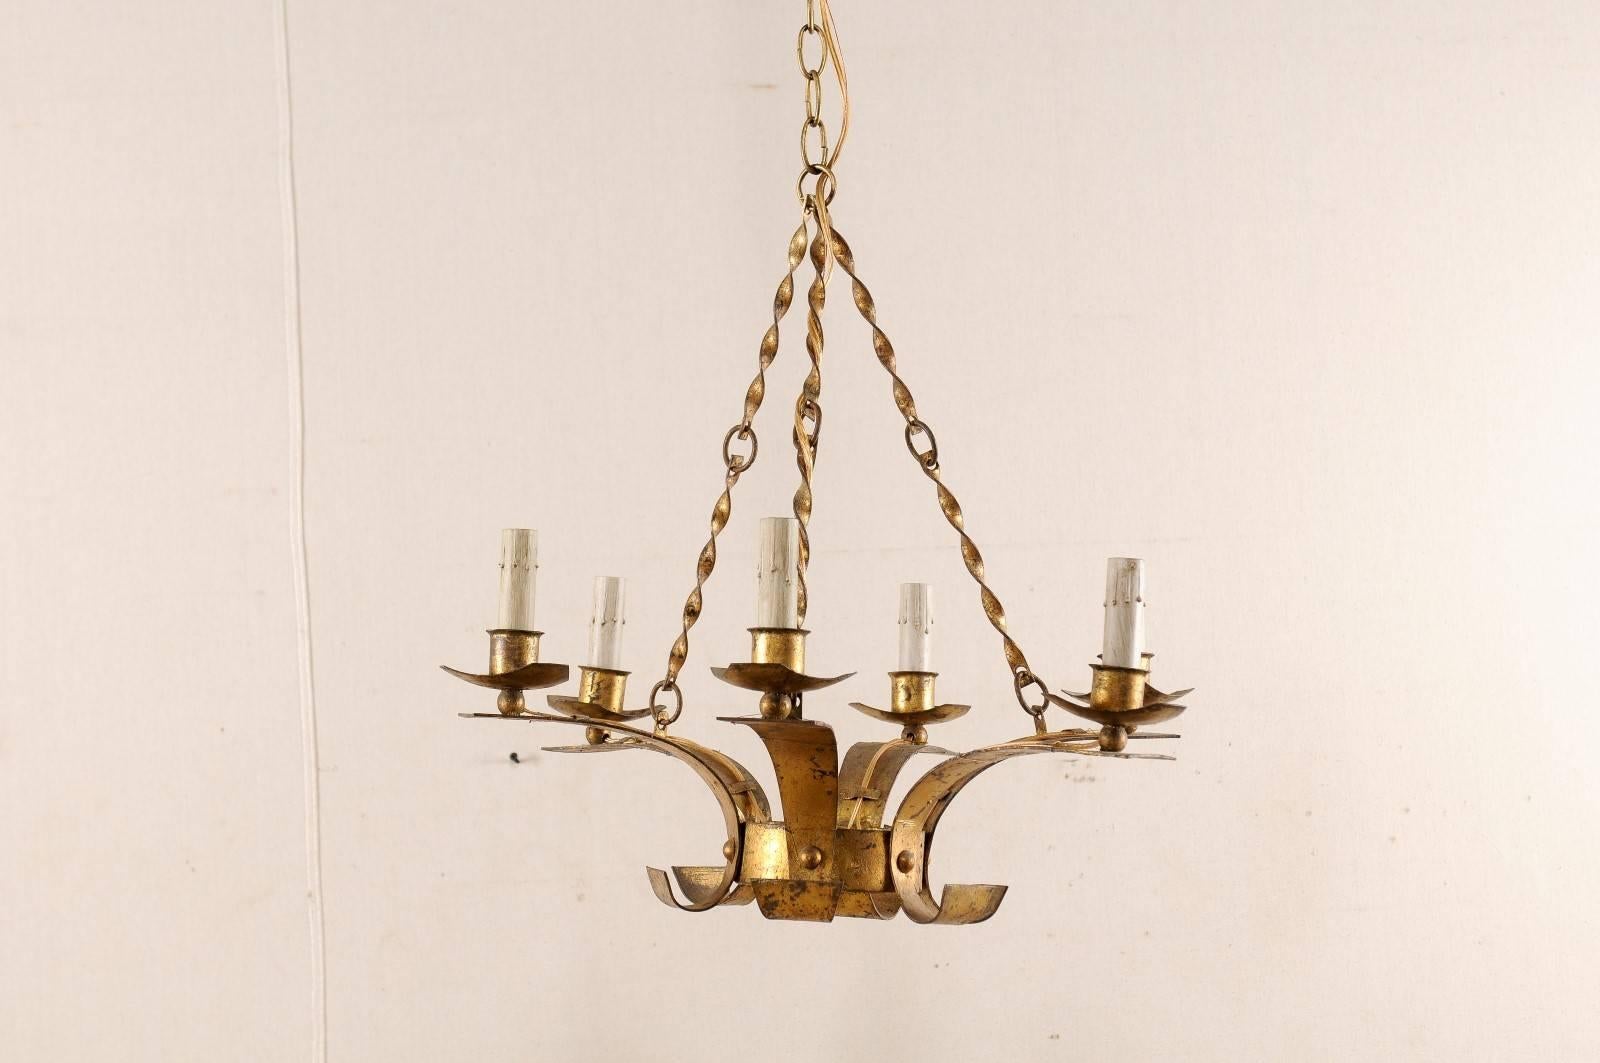 A French mid-20th century six-light chandelier. This French chandelier has a modern design featuring a small circular centre with six arms rising up and out from the centre, each supporting their metal bobèches and painted candle sleeves at the top